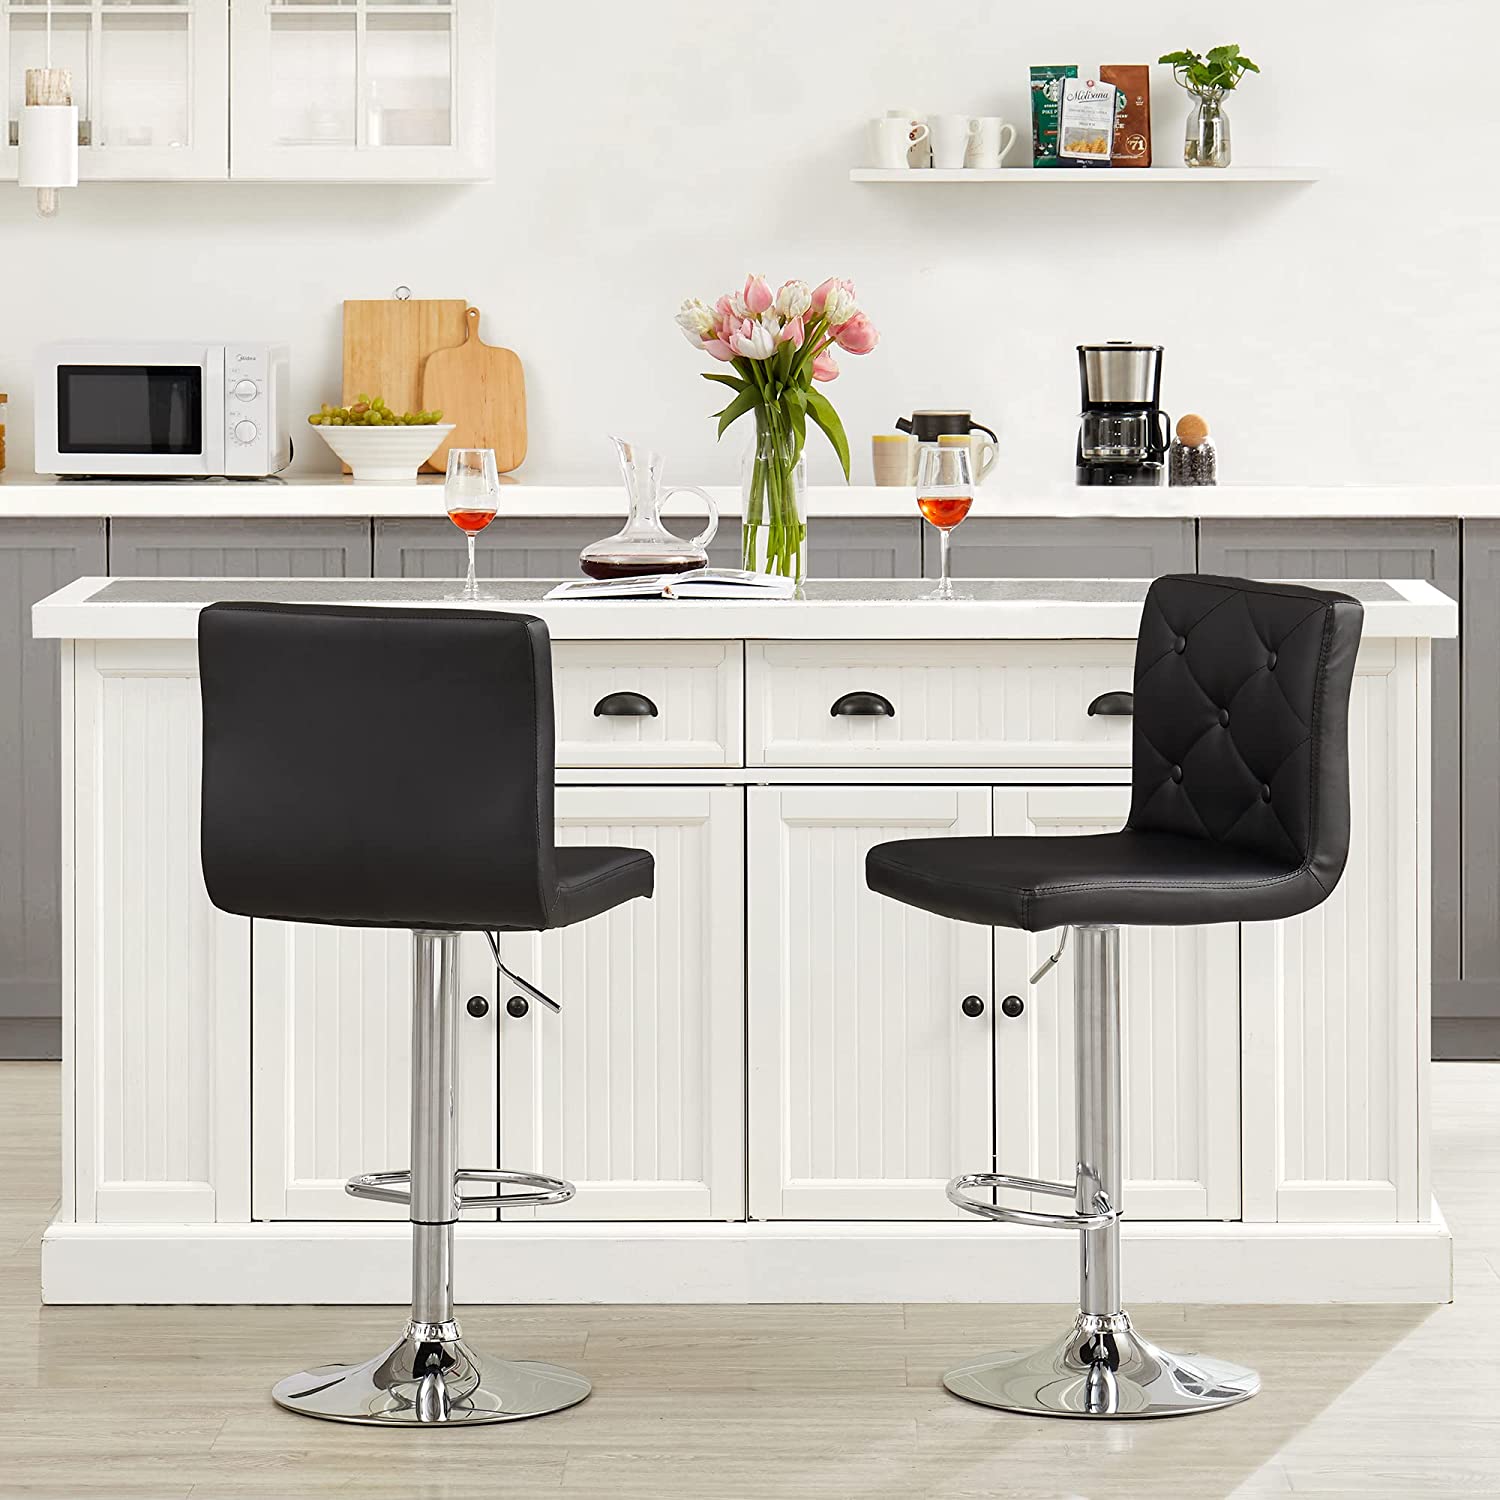 VECELO Kitchen Island Counter Height Chairs/Bar Stools with PU Leather Back&Swivel Adjustable Seat, Set of 2